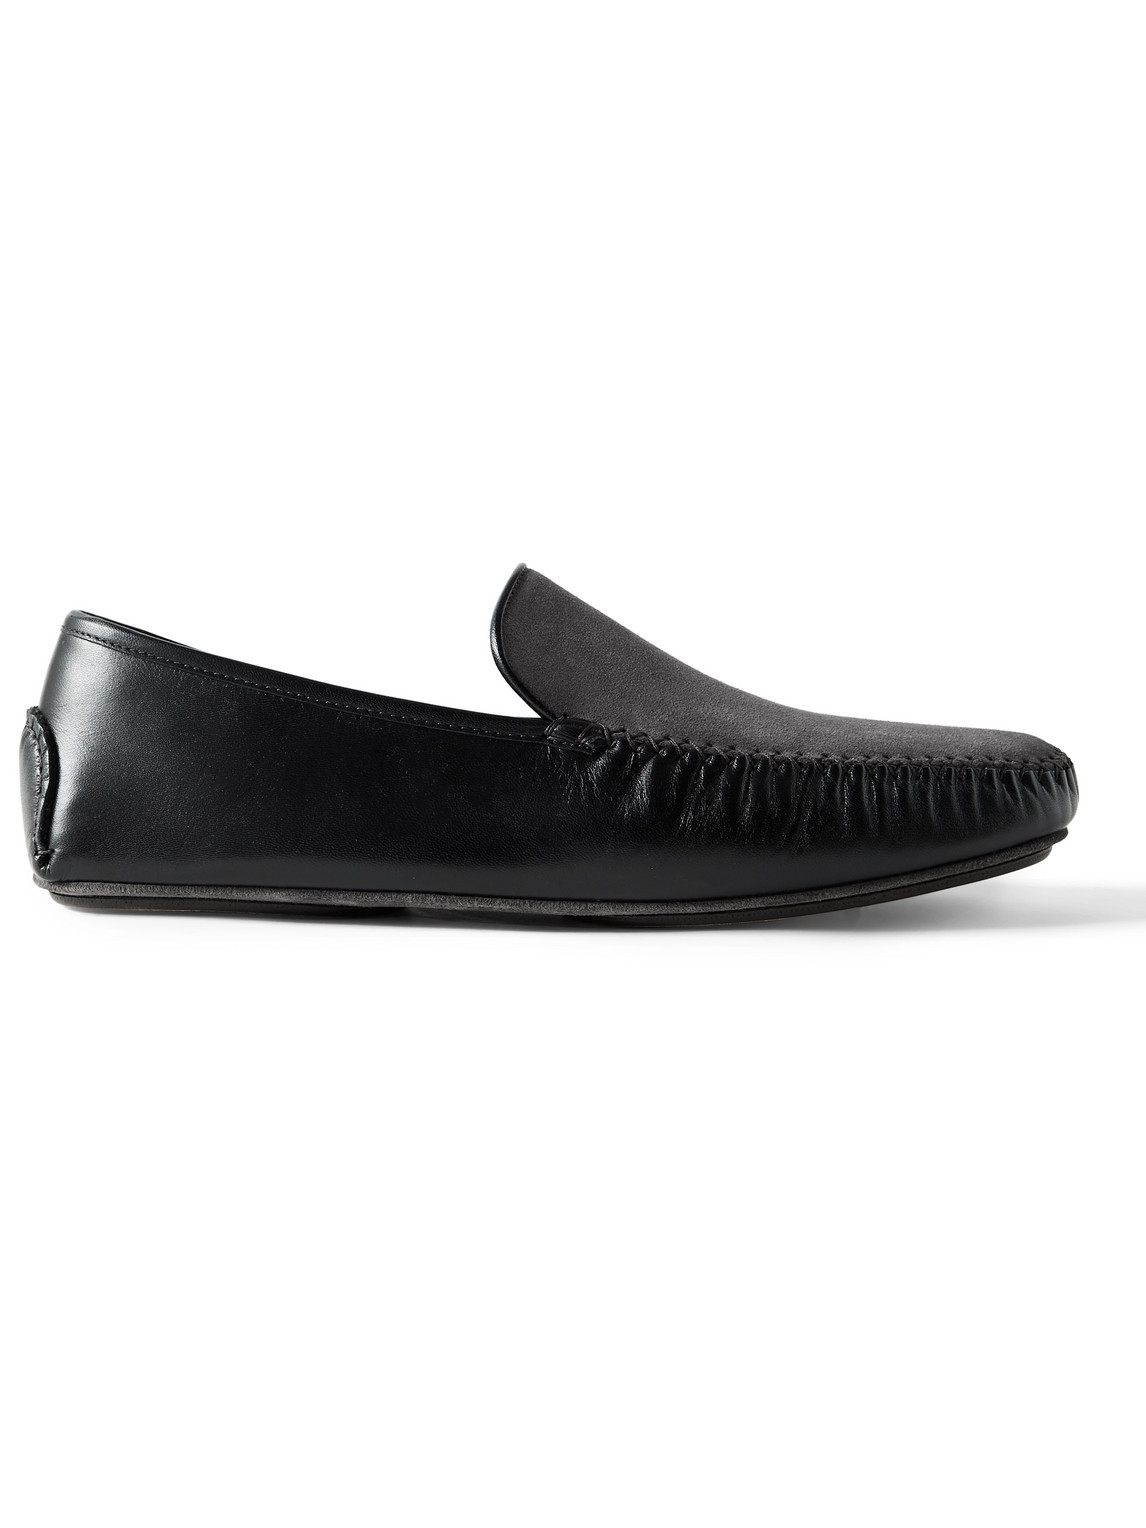 Mayfair Leather and Suede Slippers